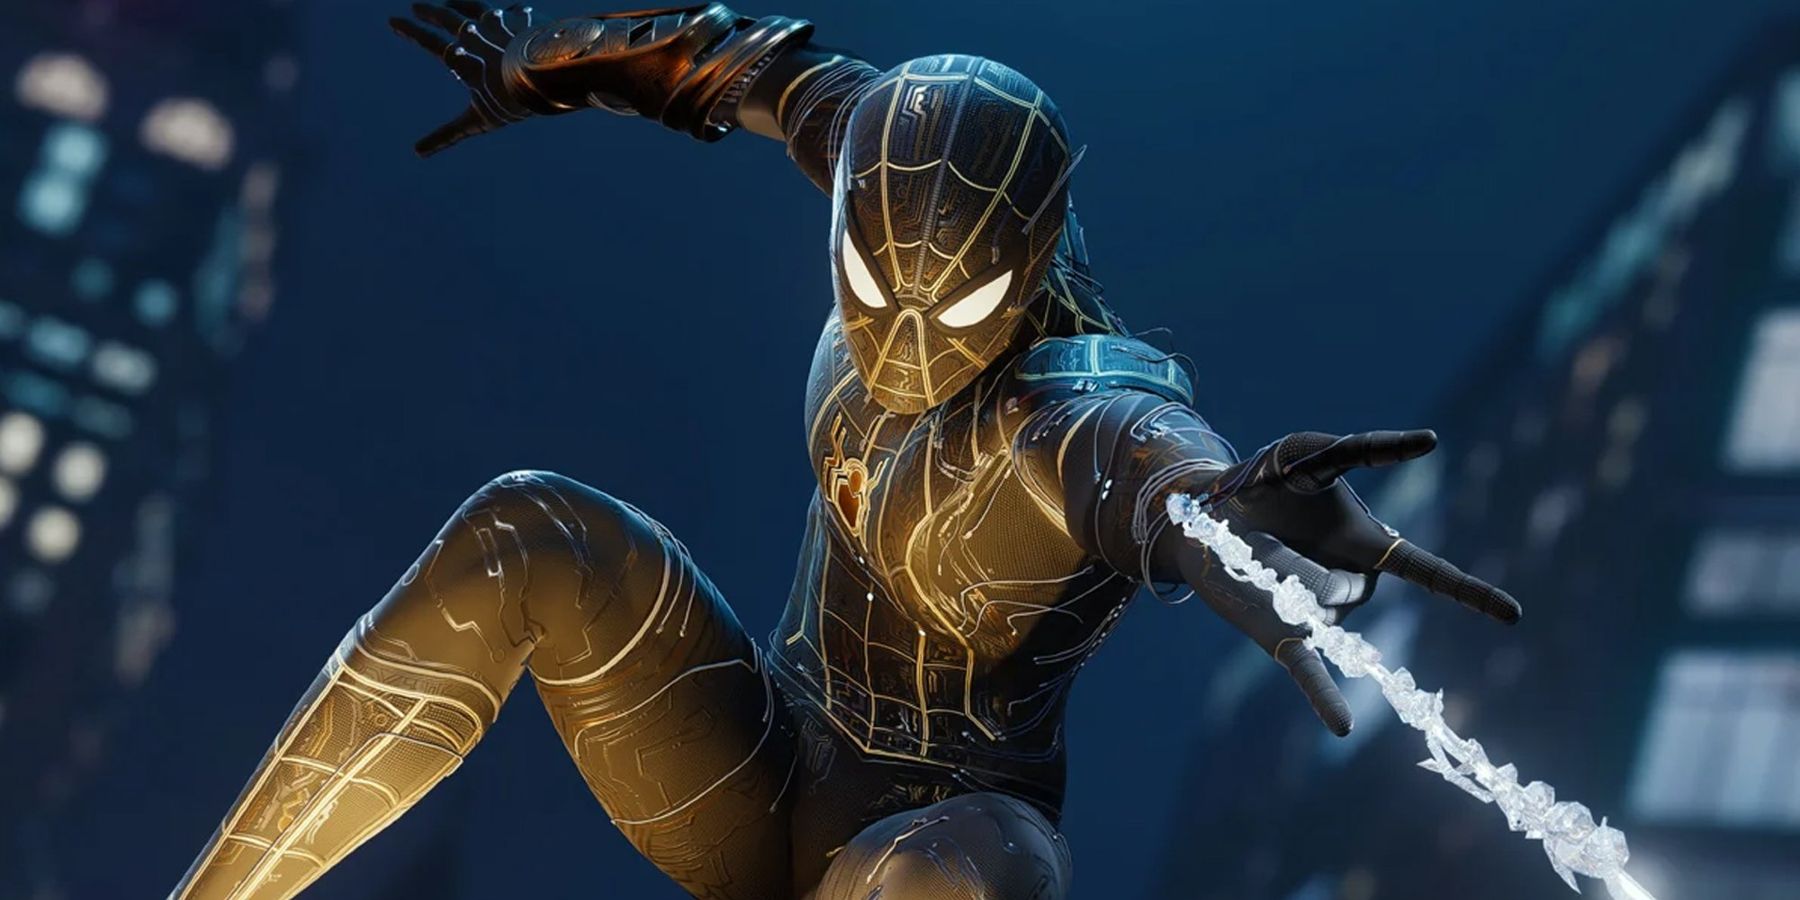 ALL 45 SUITS in Spider-Man PS4 Remastered Ranked WORST TO BEST